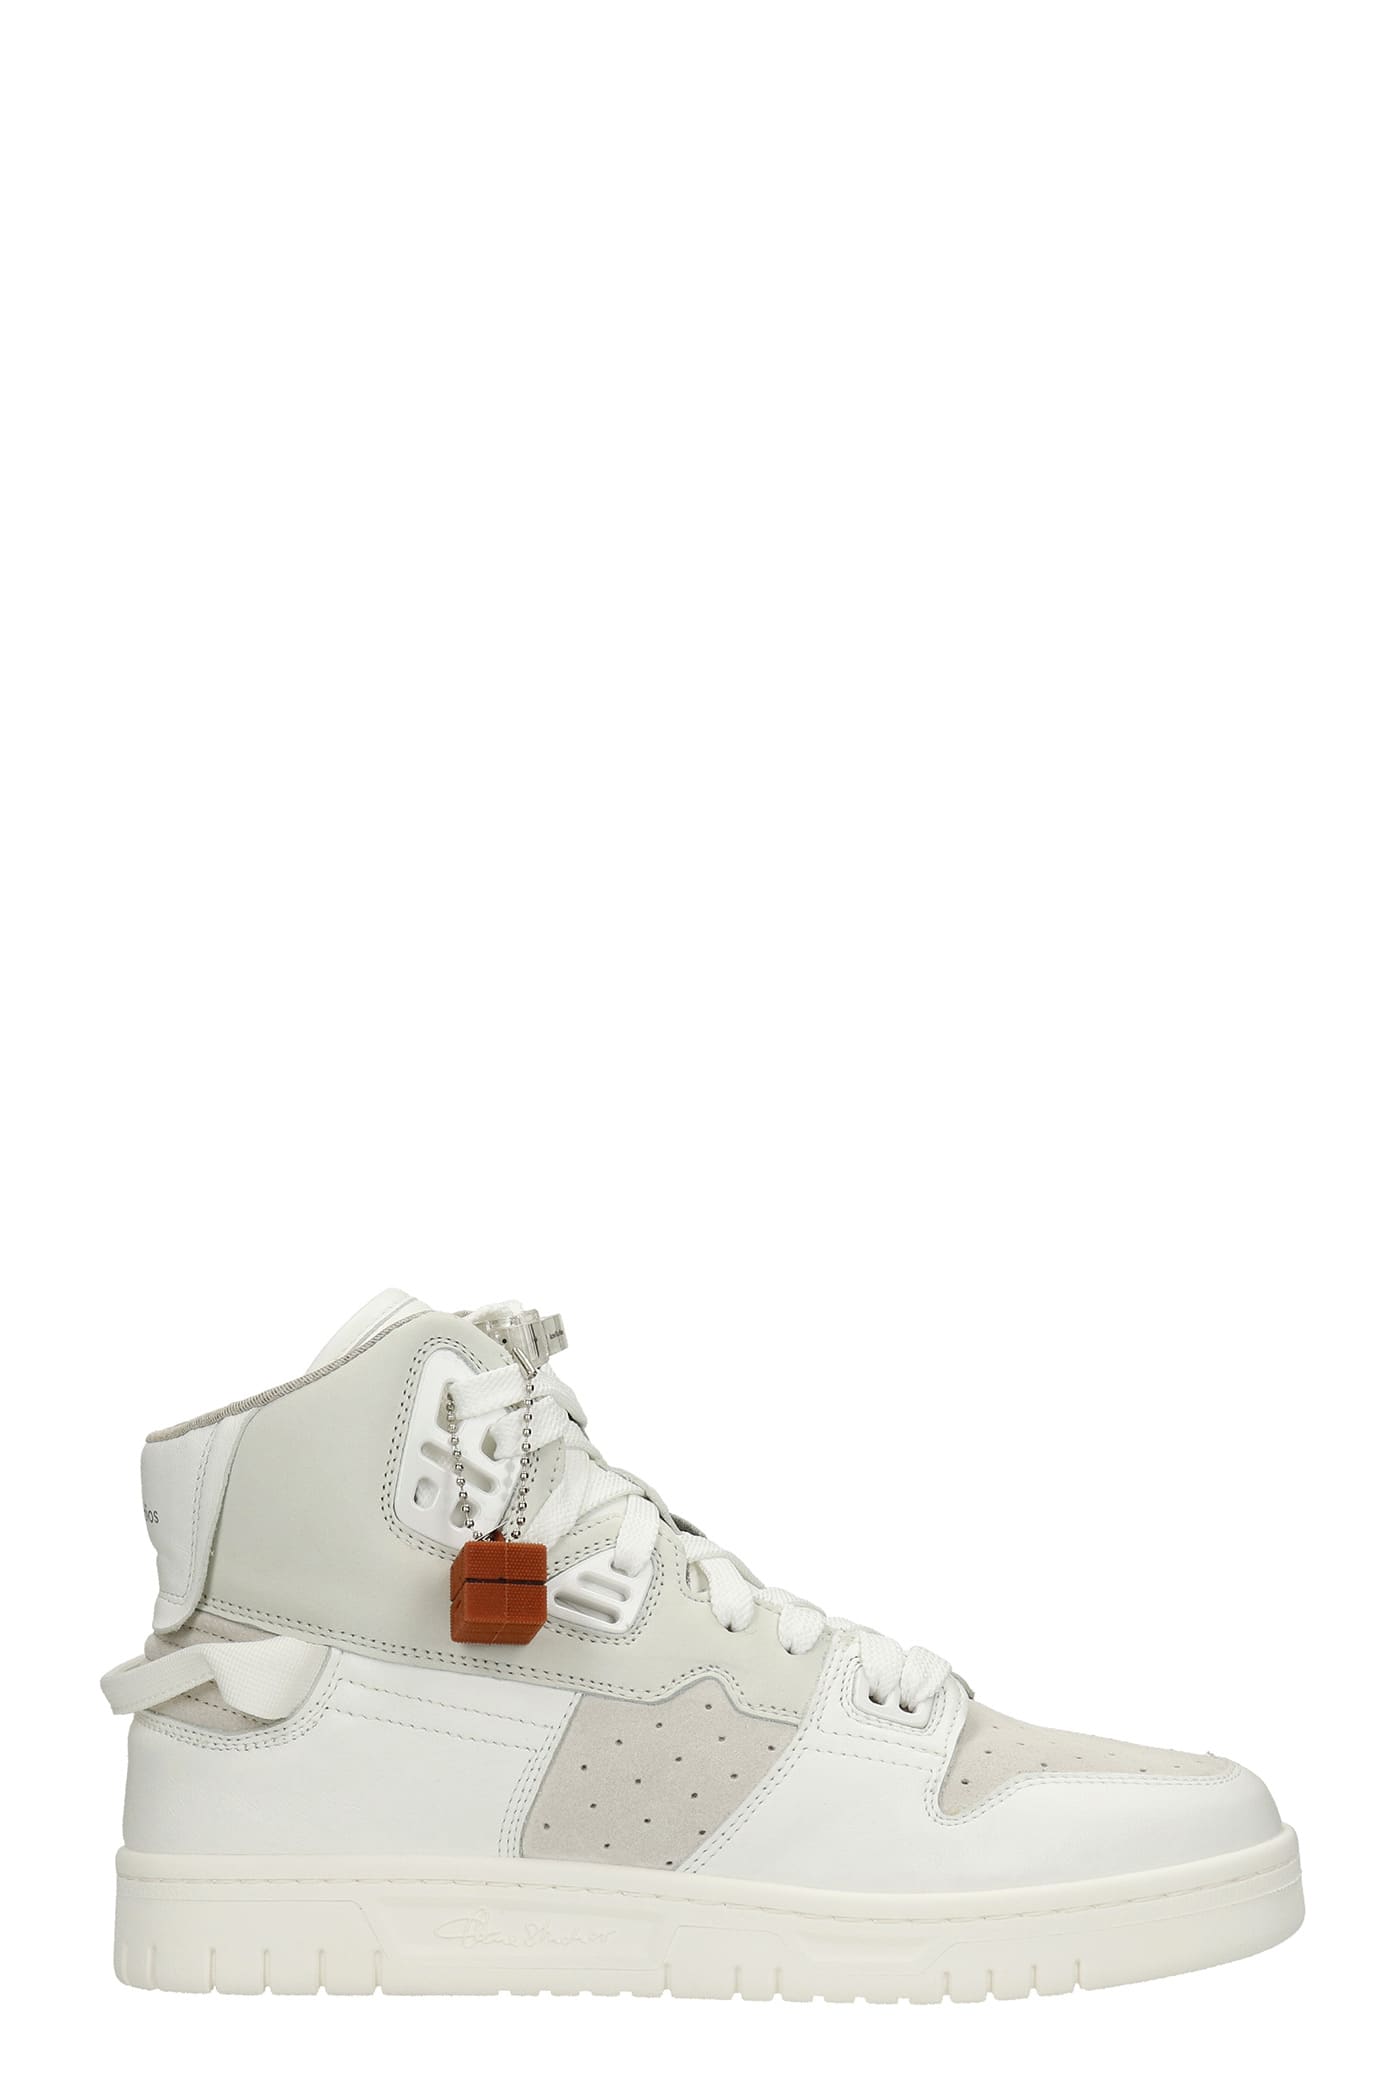 ACNE STUDIOS ACNE STUDIOS STHMC HIGH MIX trainers IN WHITE SUEDE AND LEATHER,BD017053K